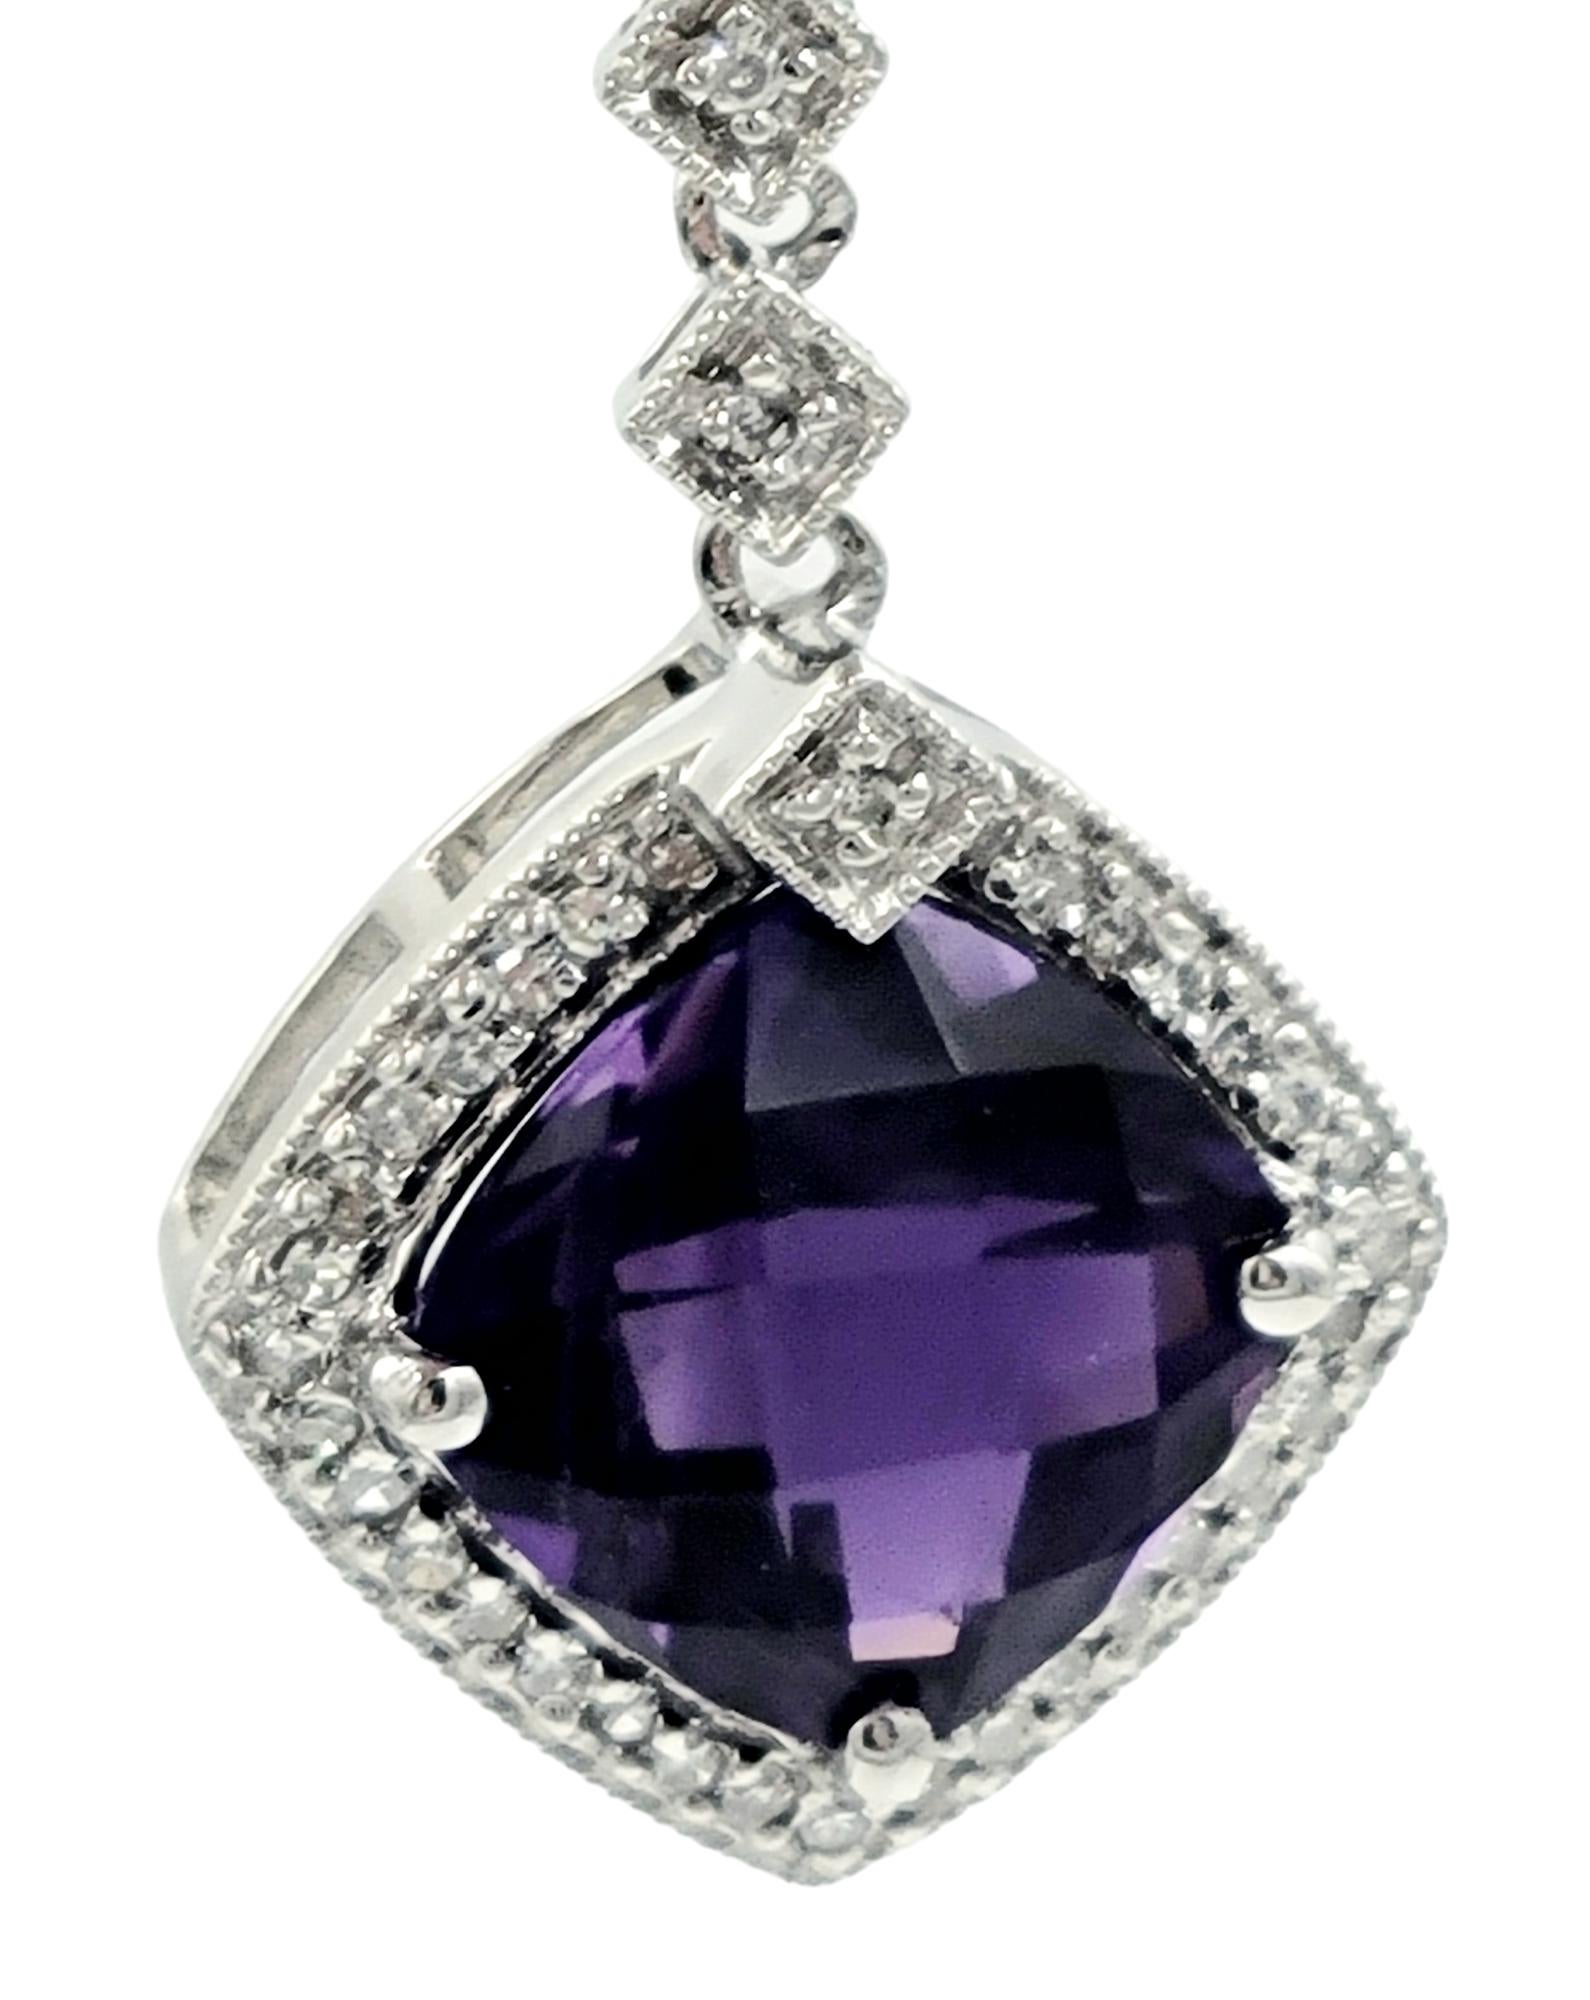 This pendant necklace, set in elegant 14 karat white gold, showcases a sophisticated and harmonious design. The central feature is a cushion-cut amethyst, exuding a rich purple hue. Surrounding the amethyst is a sparkling halo of diamonds, adding